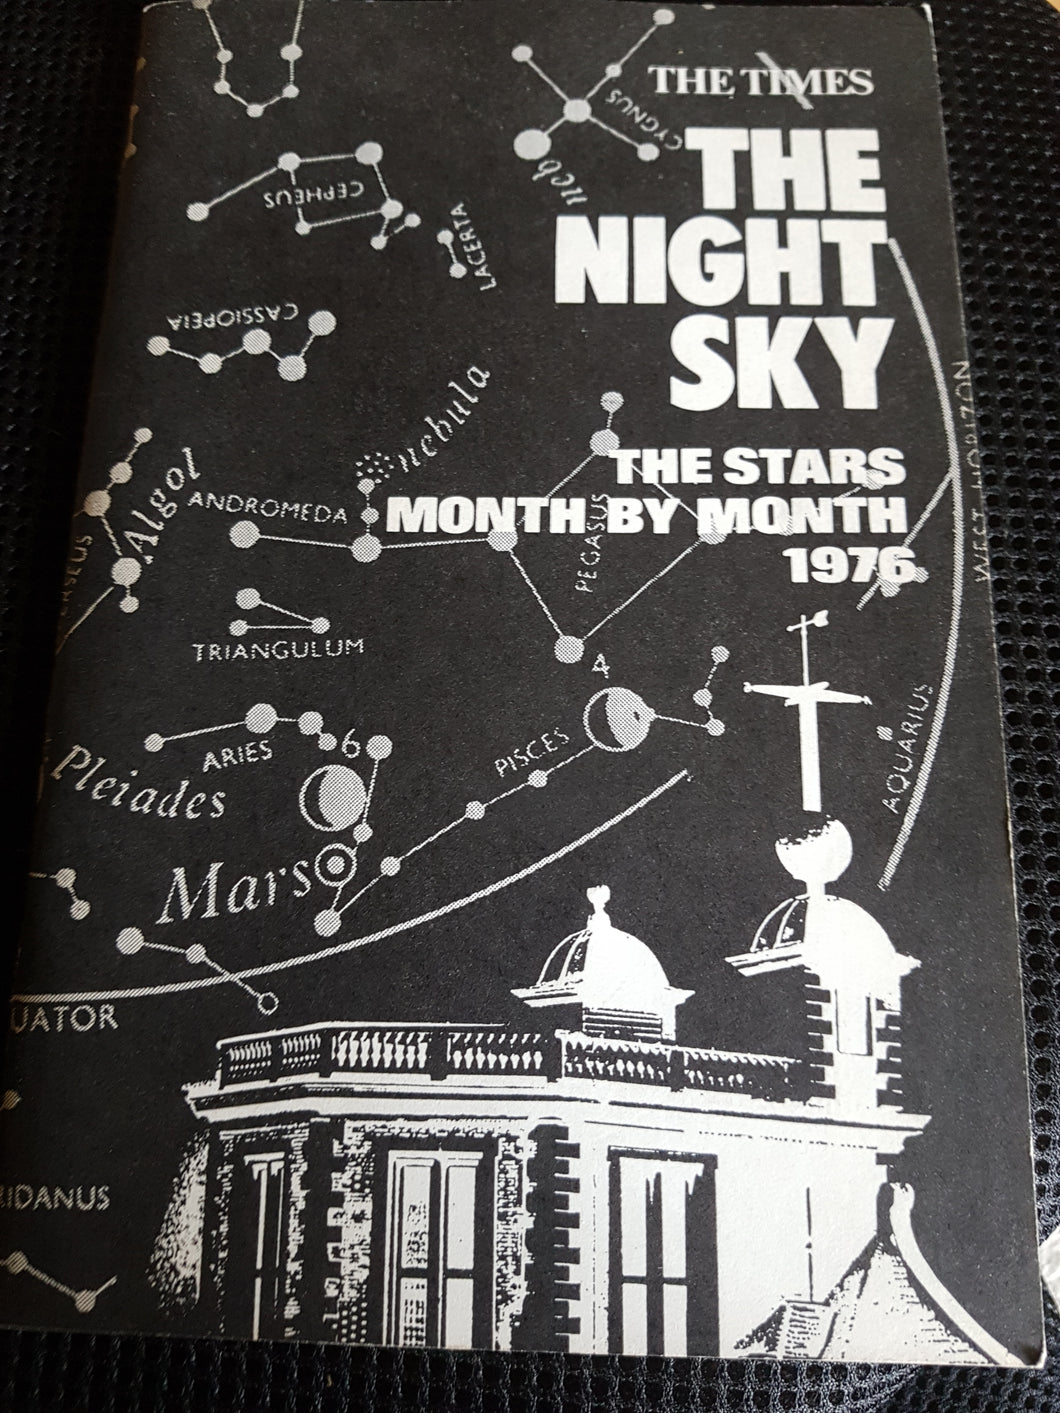 Times Night Sky 1976. The stars month by month. Paperback.